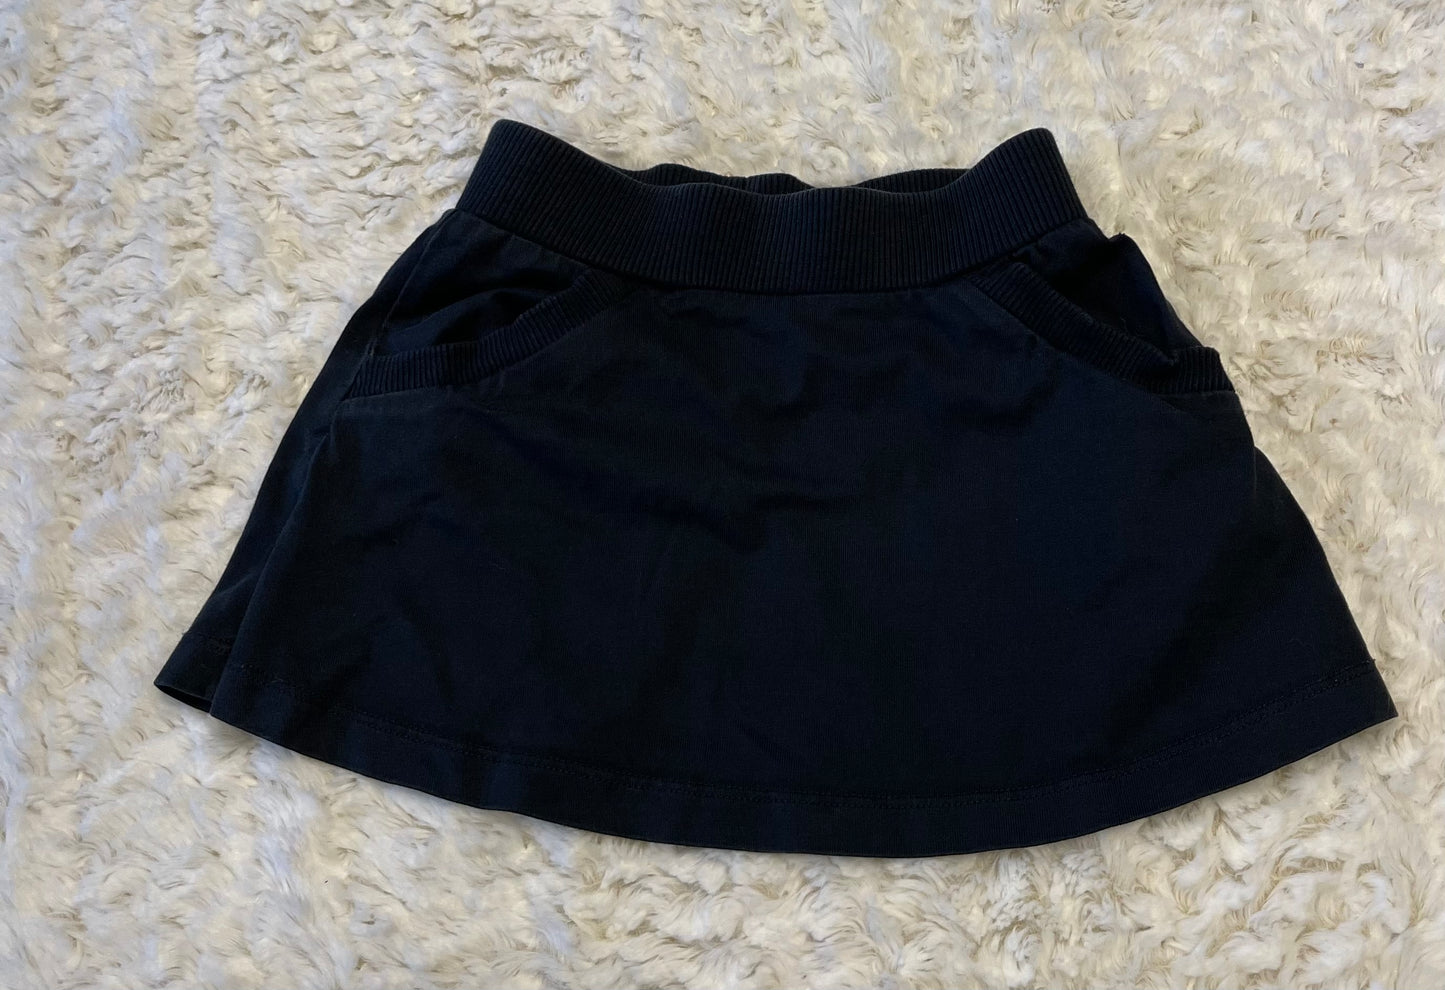 3T Hanna Andersson black skirt with pockets vguc